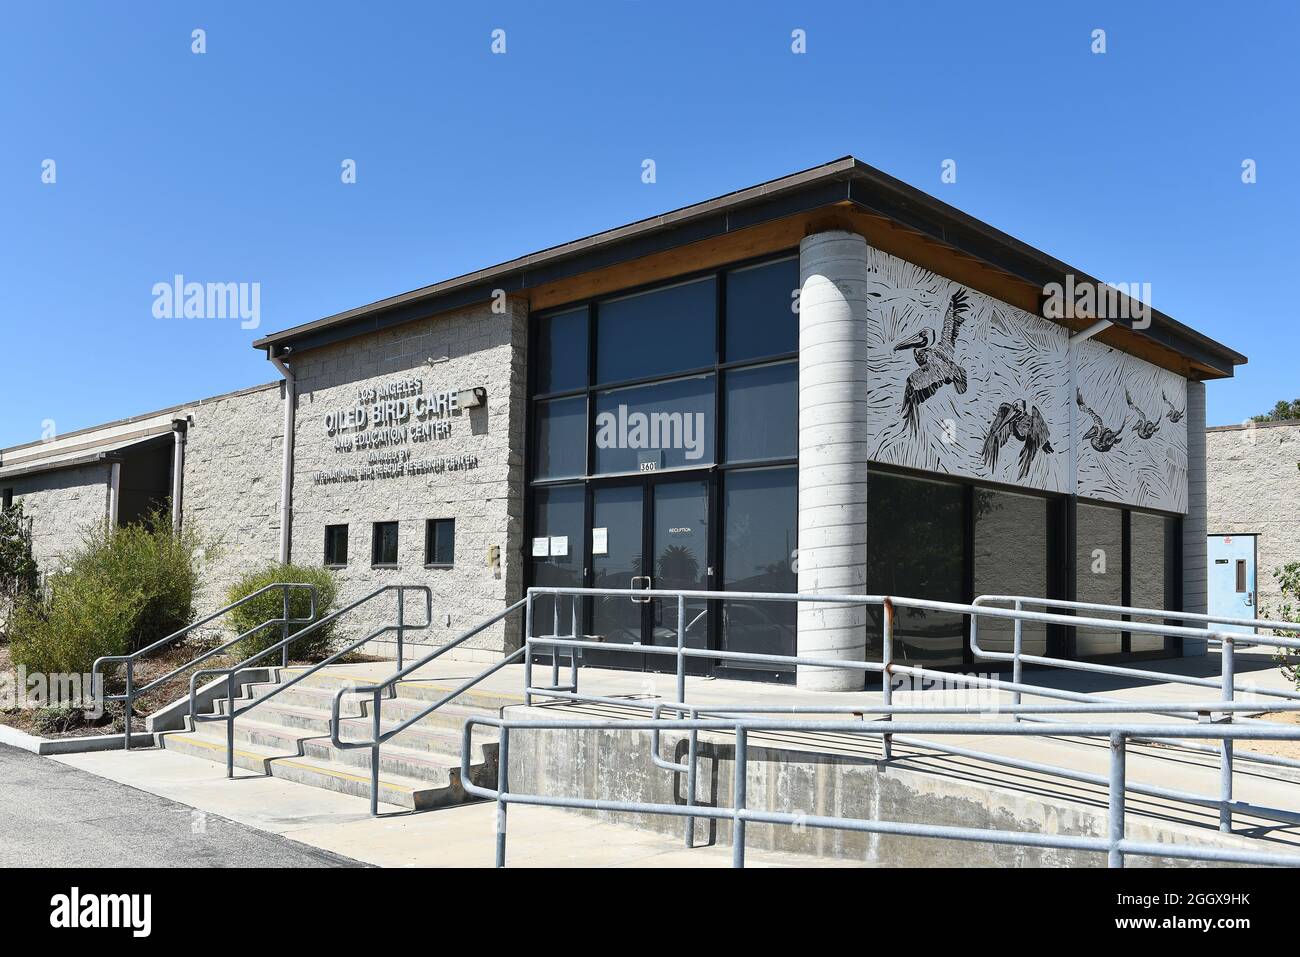 SAN PEDRO, CALIFORNIA - 27 AUG 2021: Los Angeles Oiled Bird Care and Education Center, treats seabirds, wading birds and waterfowl affected by oil spi Stock Photo